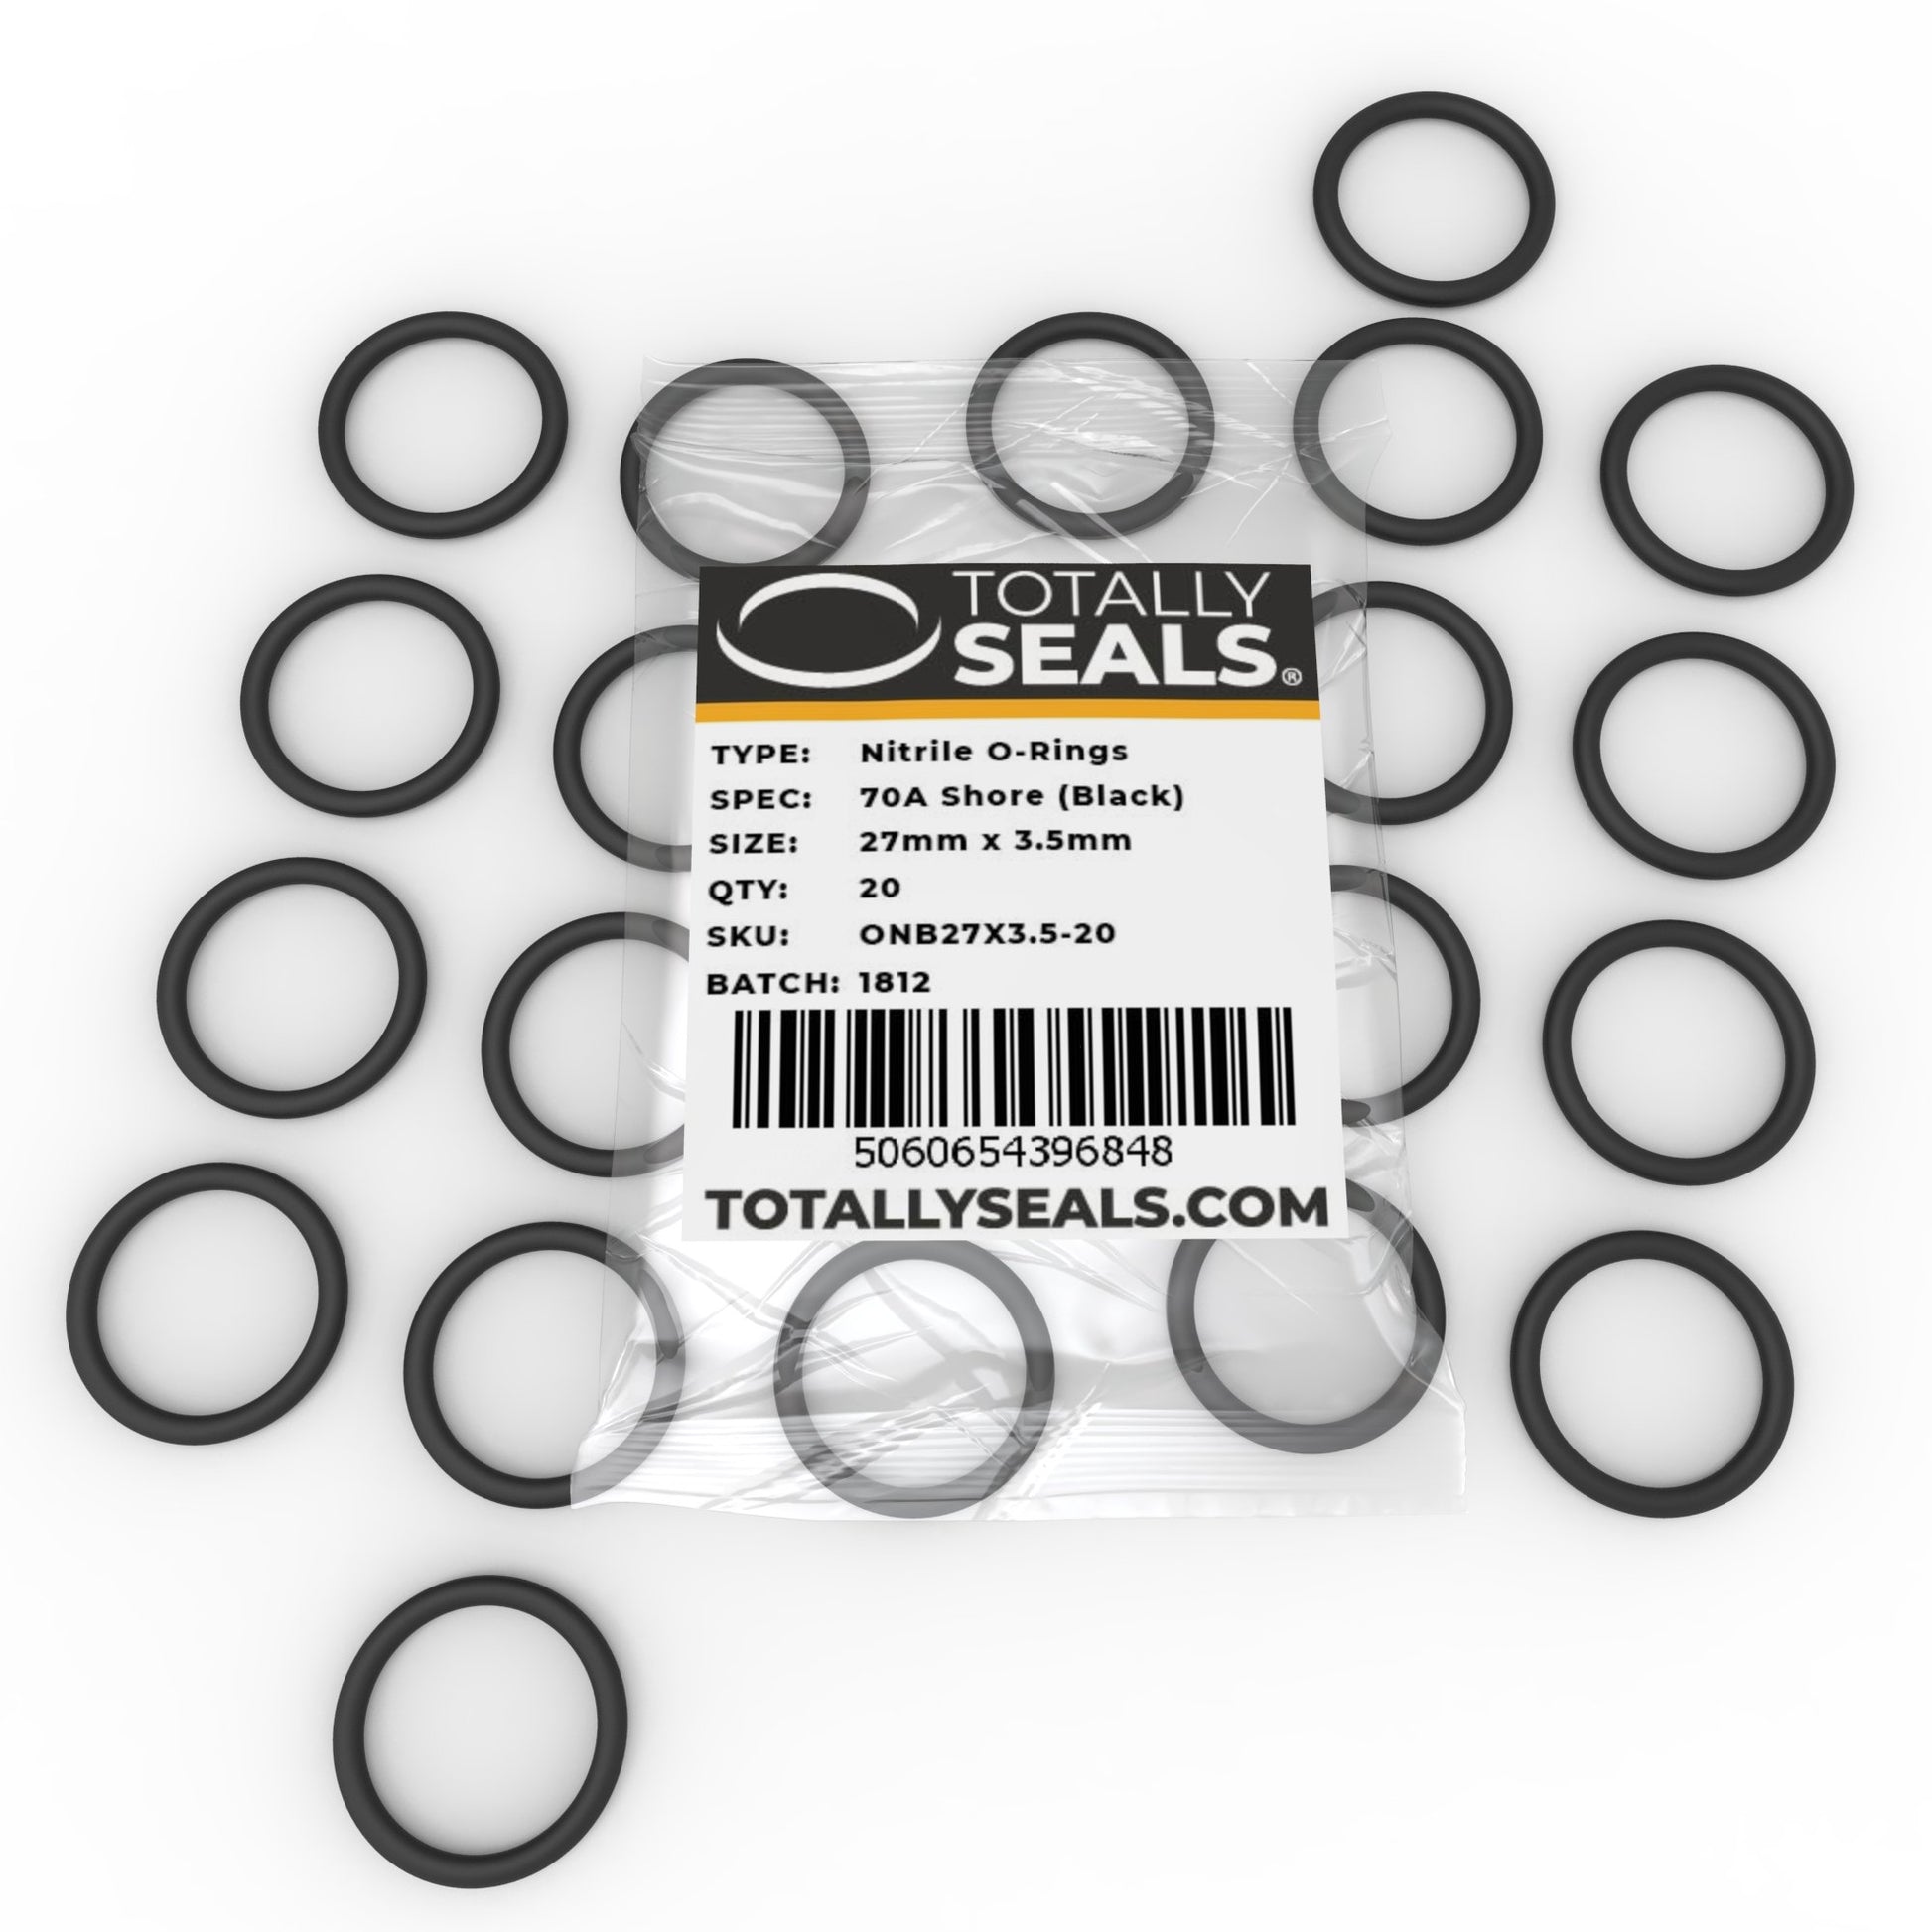 27mm x 3.5mm (34mm OD) Nitrile O-Rings - Totally Seals®